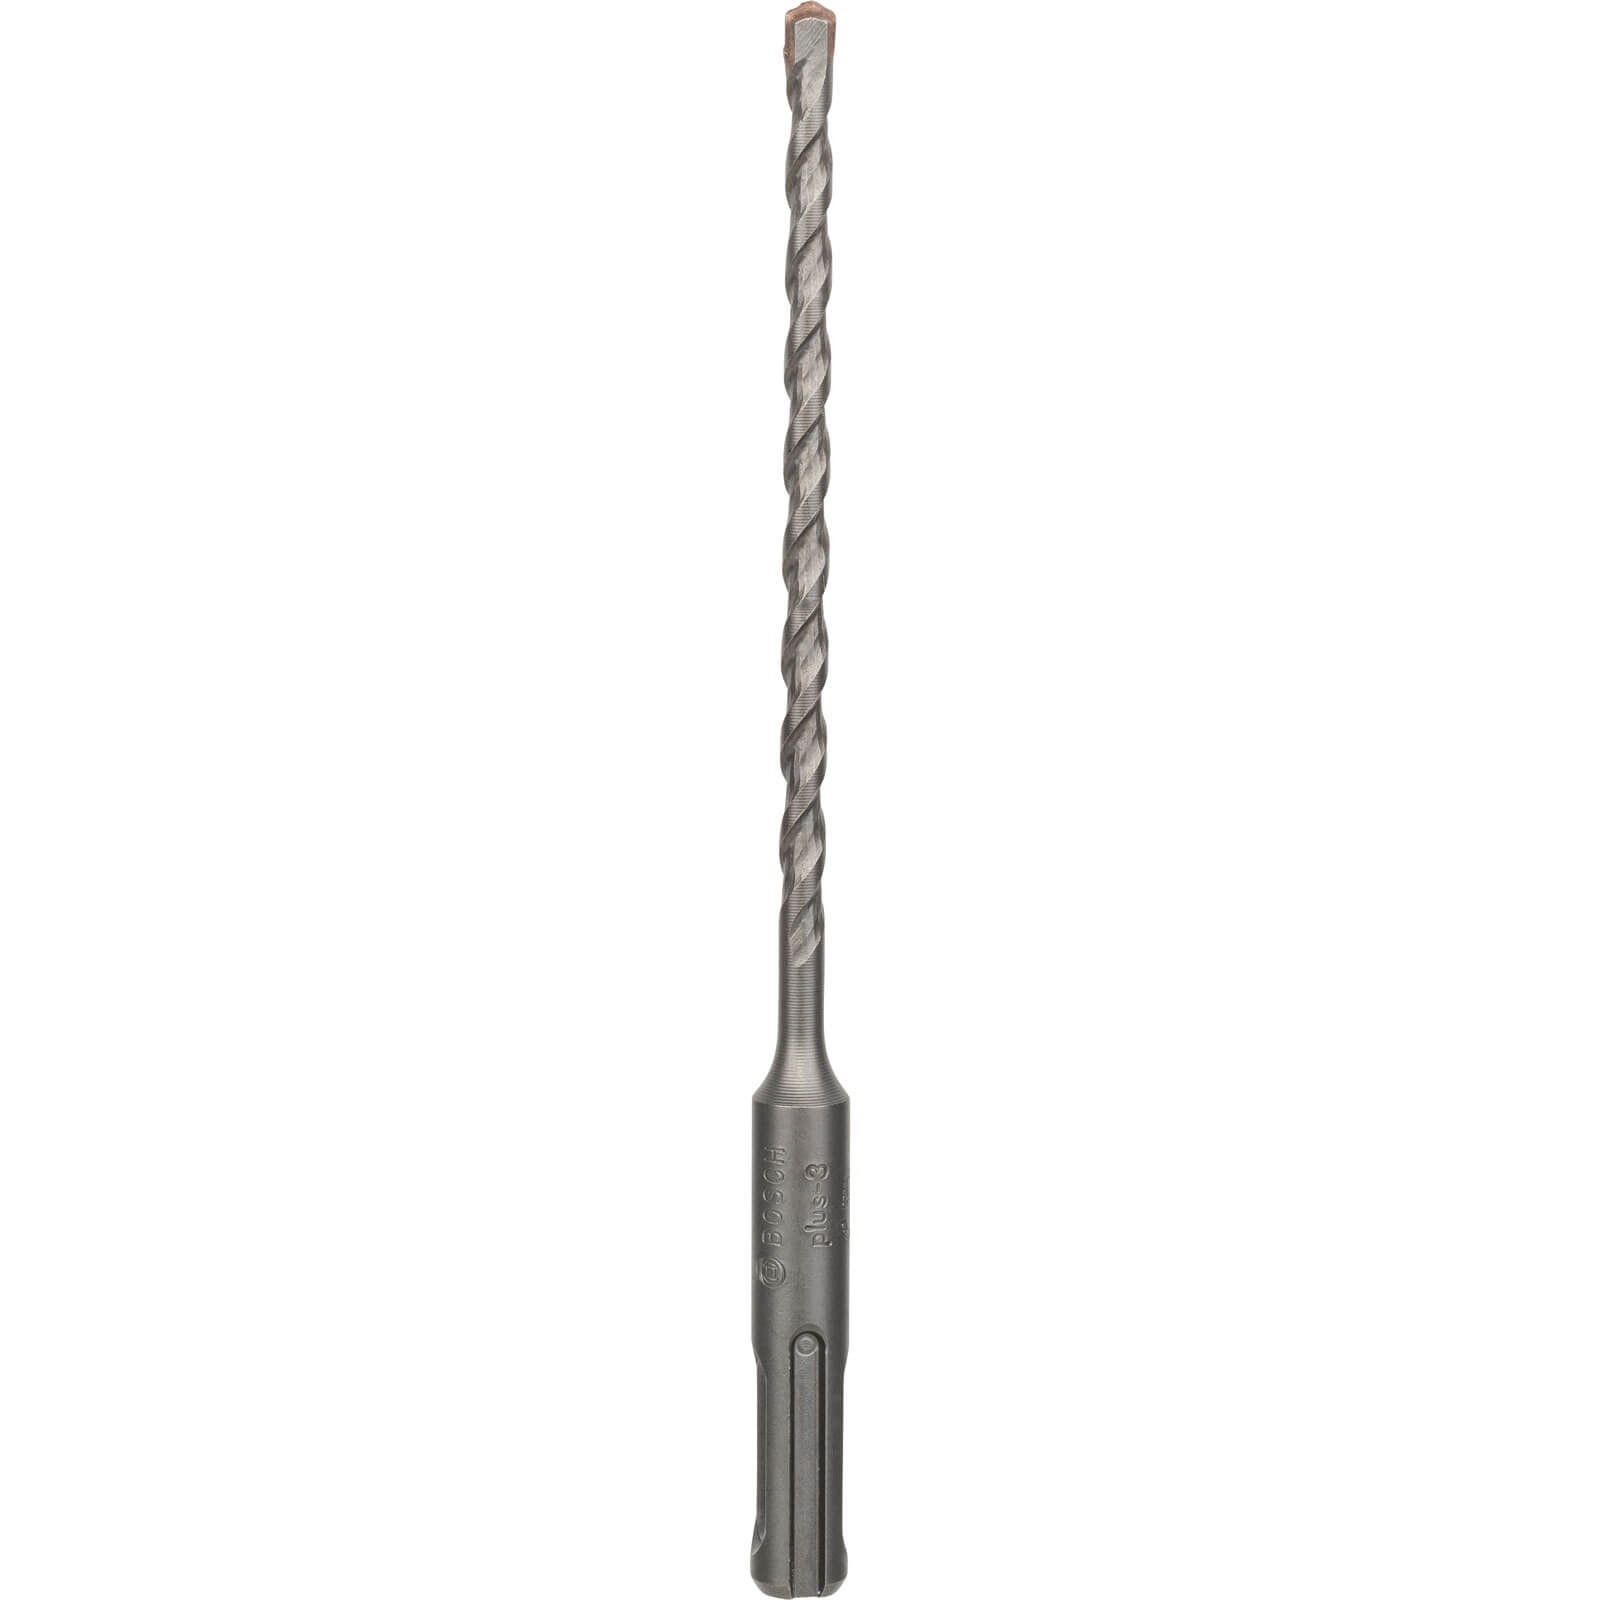 Image of Bosch Series 3 SDS Plus Masonry Drill Bit 5mm 160mm Pack of 1